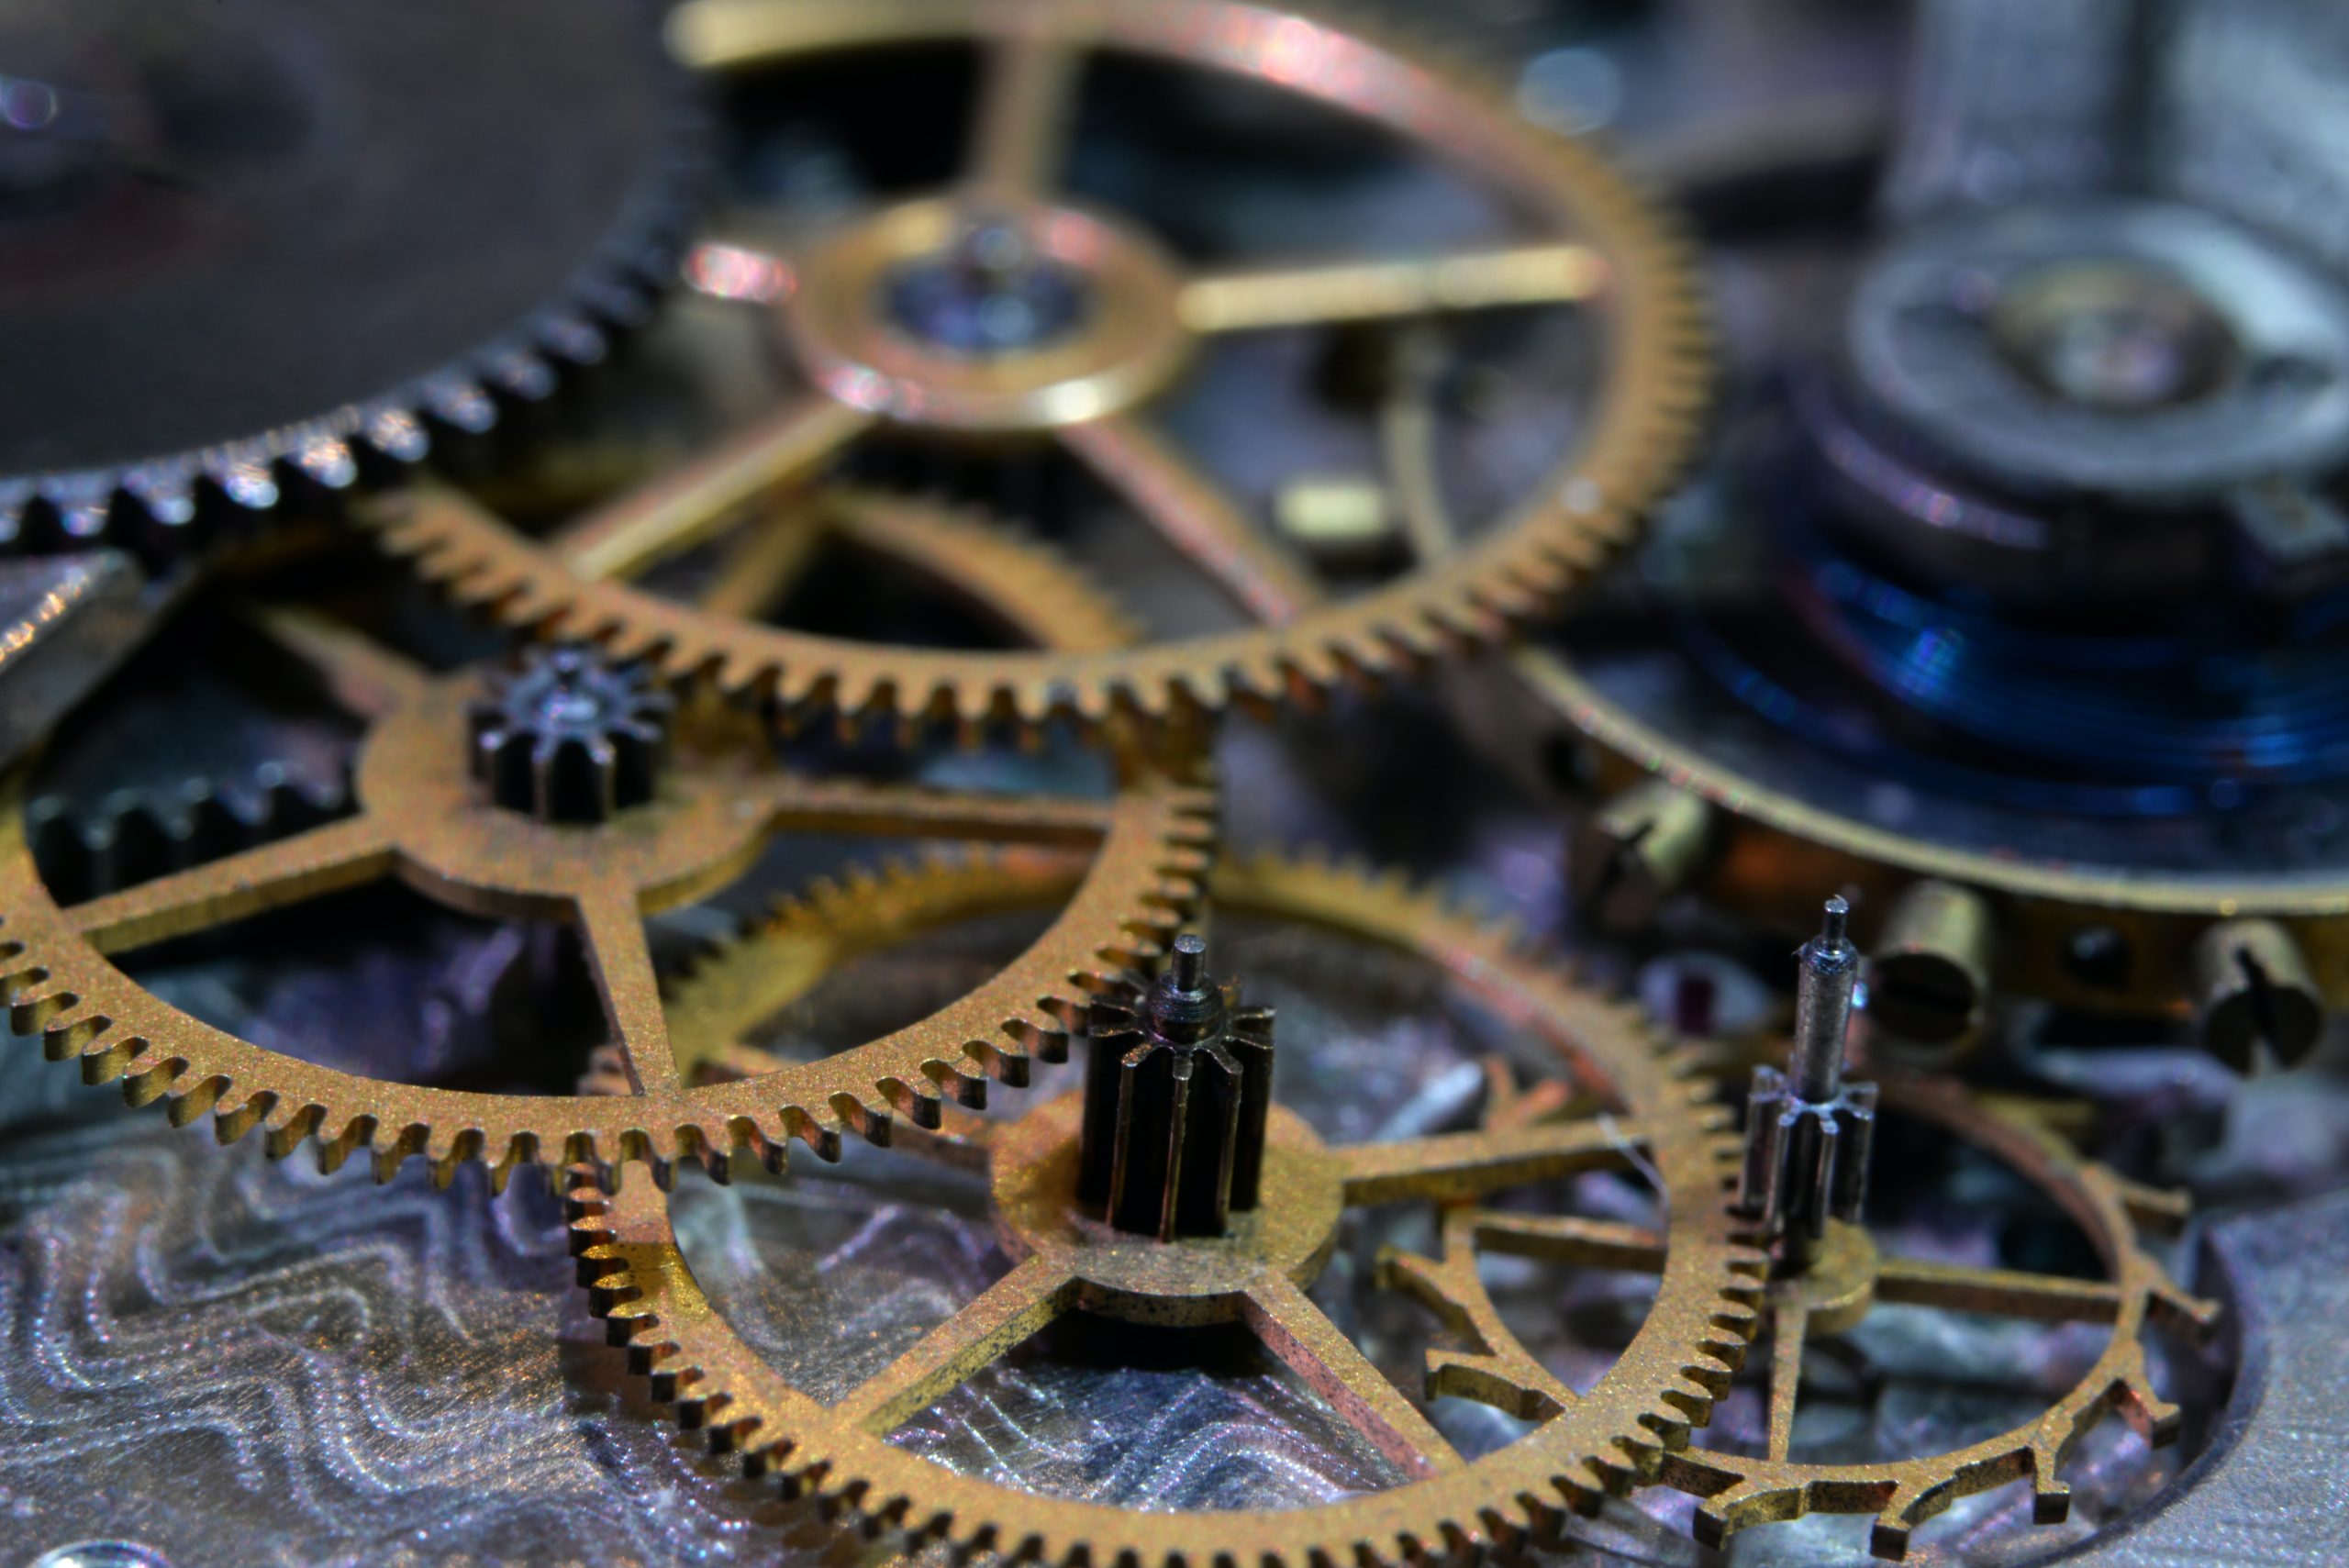 cogs and gears to represent the elements involved in the partnership admission process